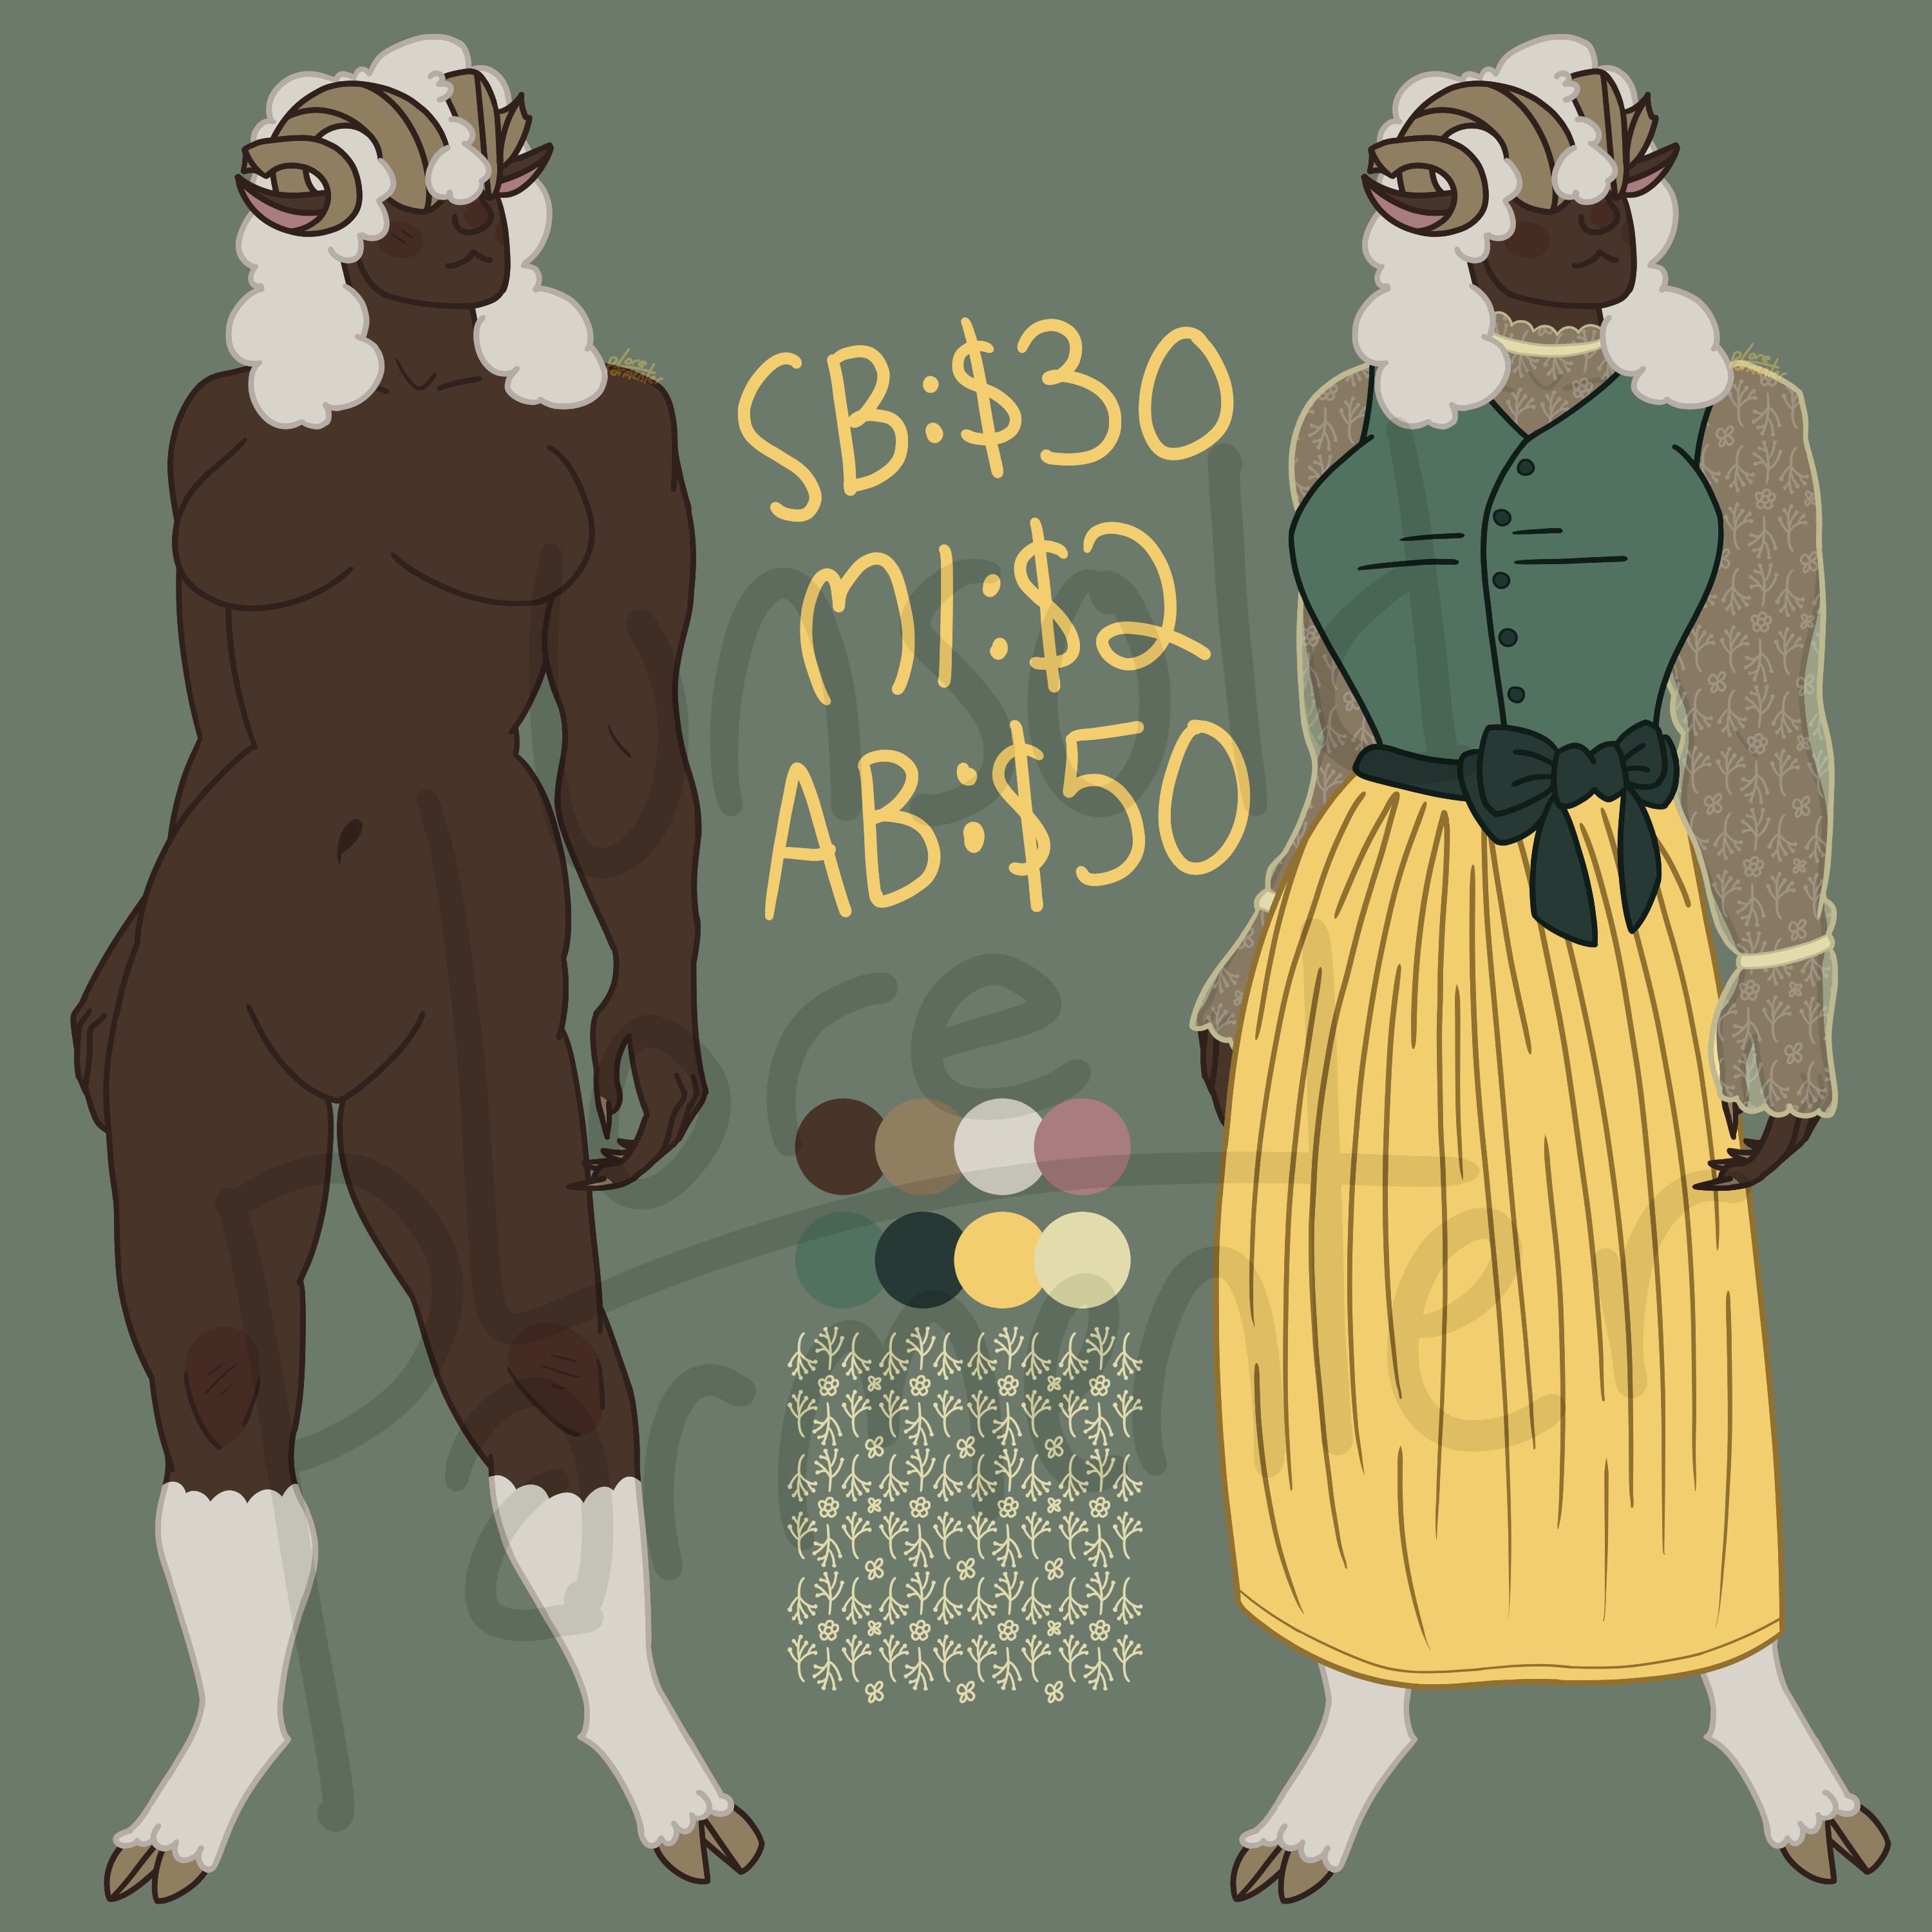 The adopt mentioned above. She is a person of color with fluffy white hair and tan horns. Her lower legs are sheep legs. She is wearing a green dress with a yellow skirt and a sheer ivory undershirt.